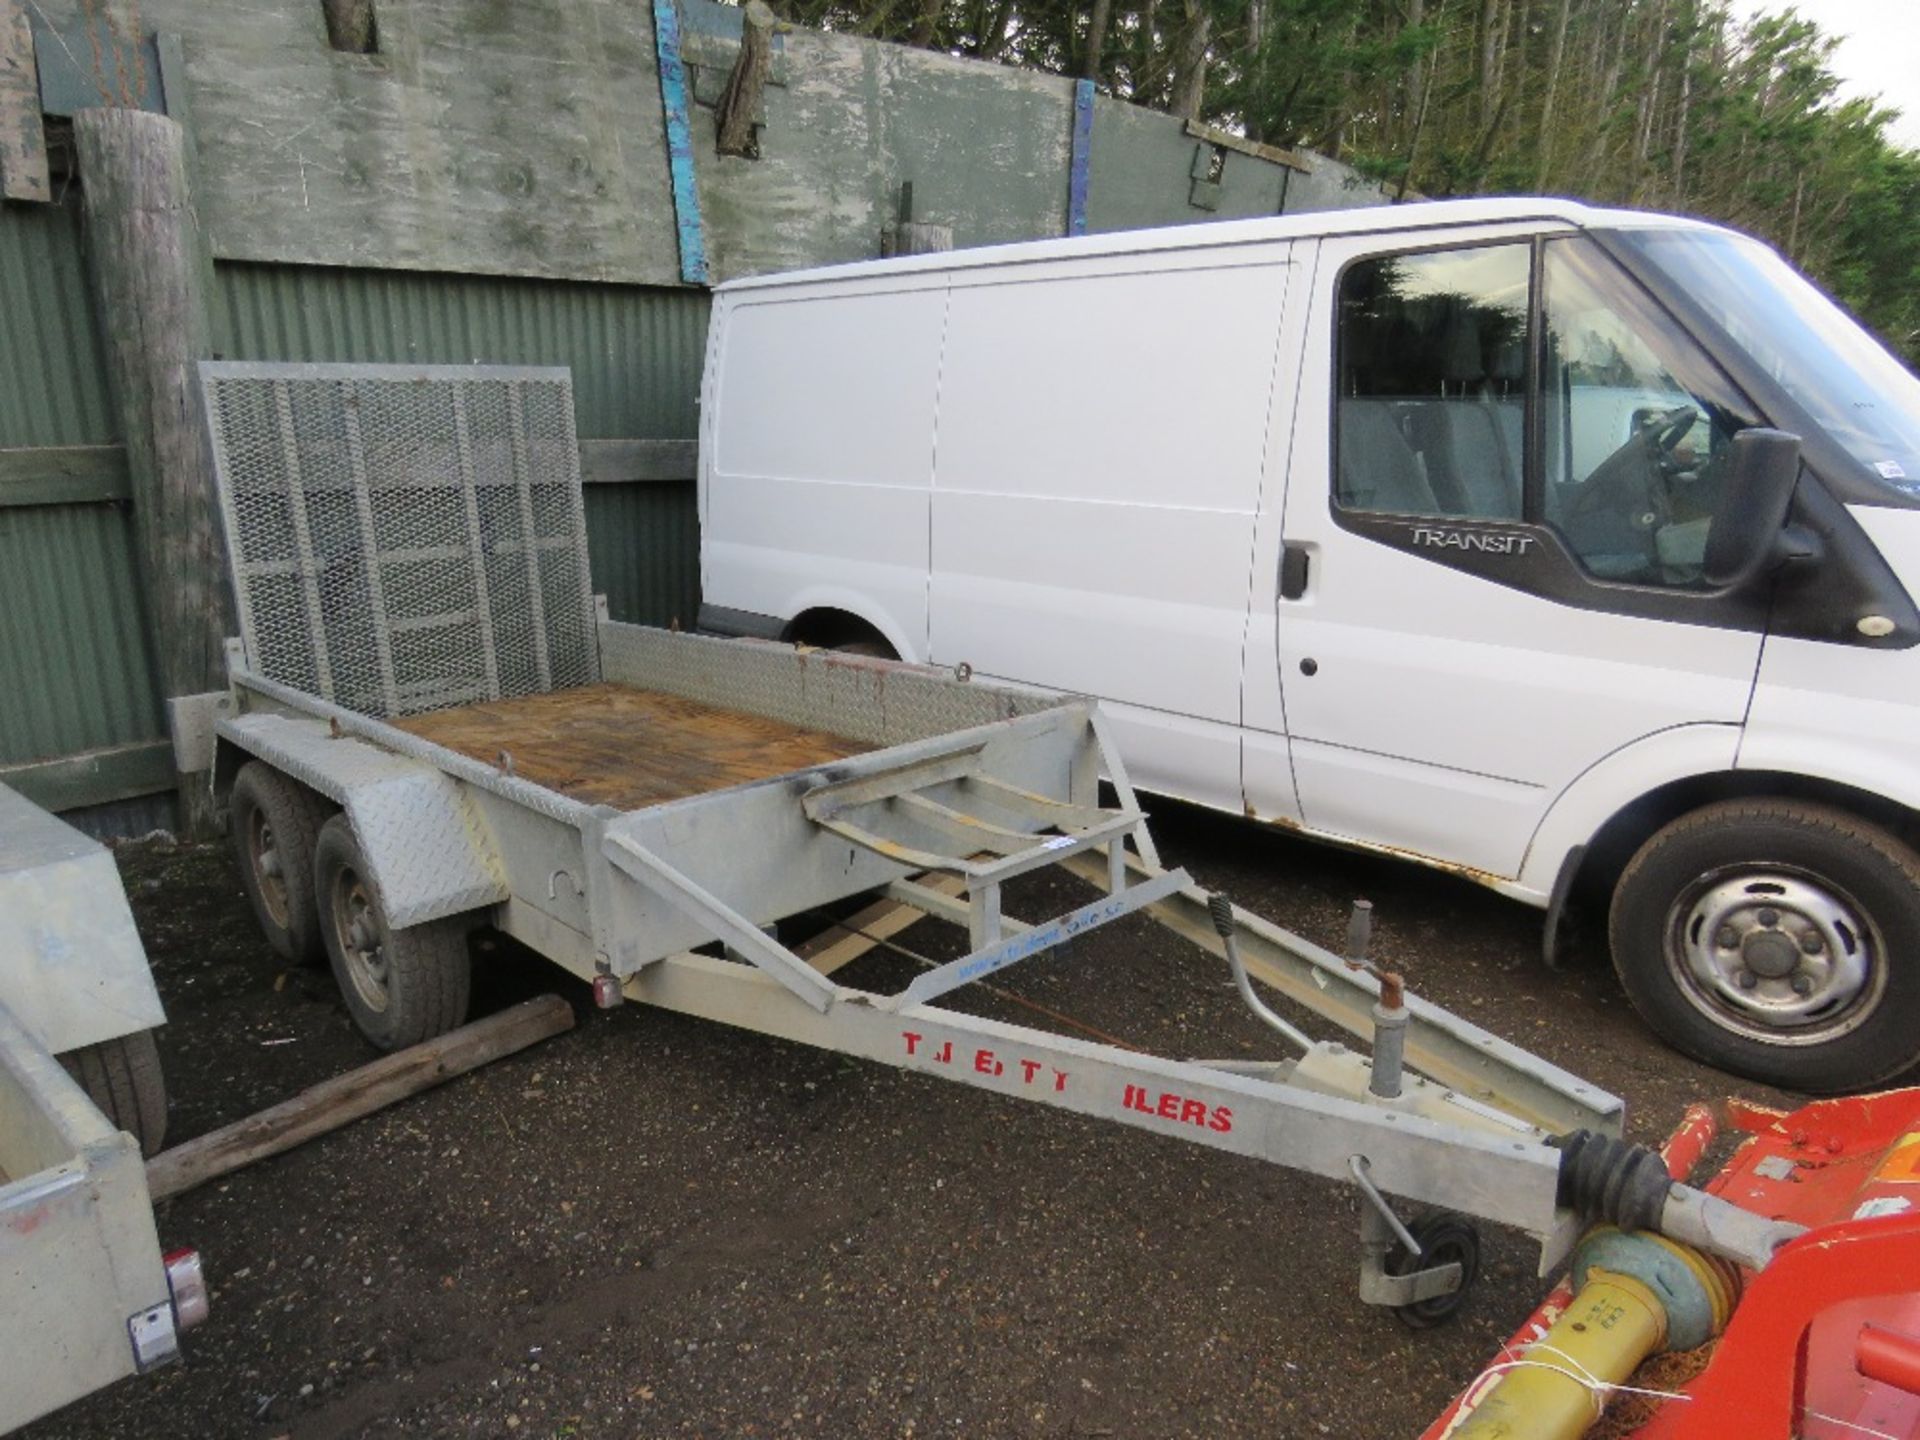 TRIDENT TWIN AXLED MINI DIGGER PLANT TRAILER. REAR RAMP. ID:087417. 8FT X 4FT APPROX. DIRECT FROM L - Image 3 of 5